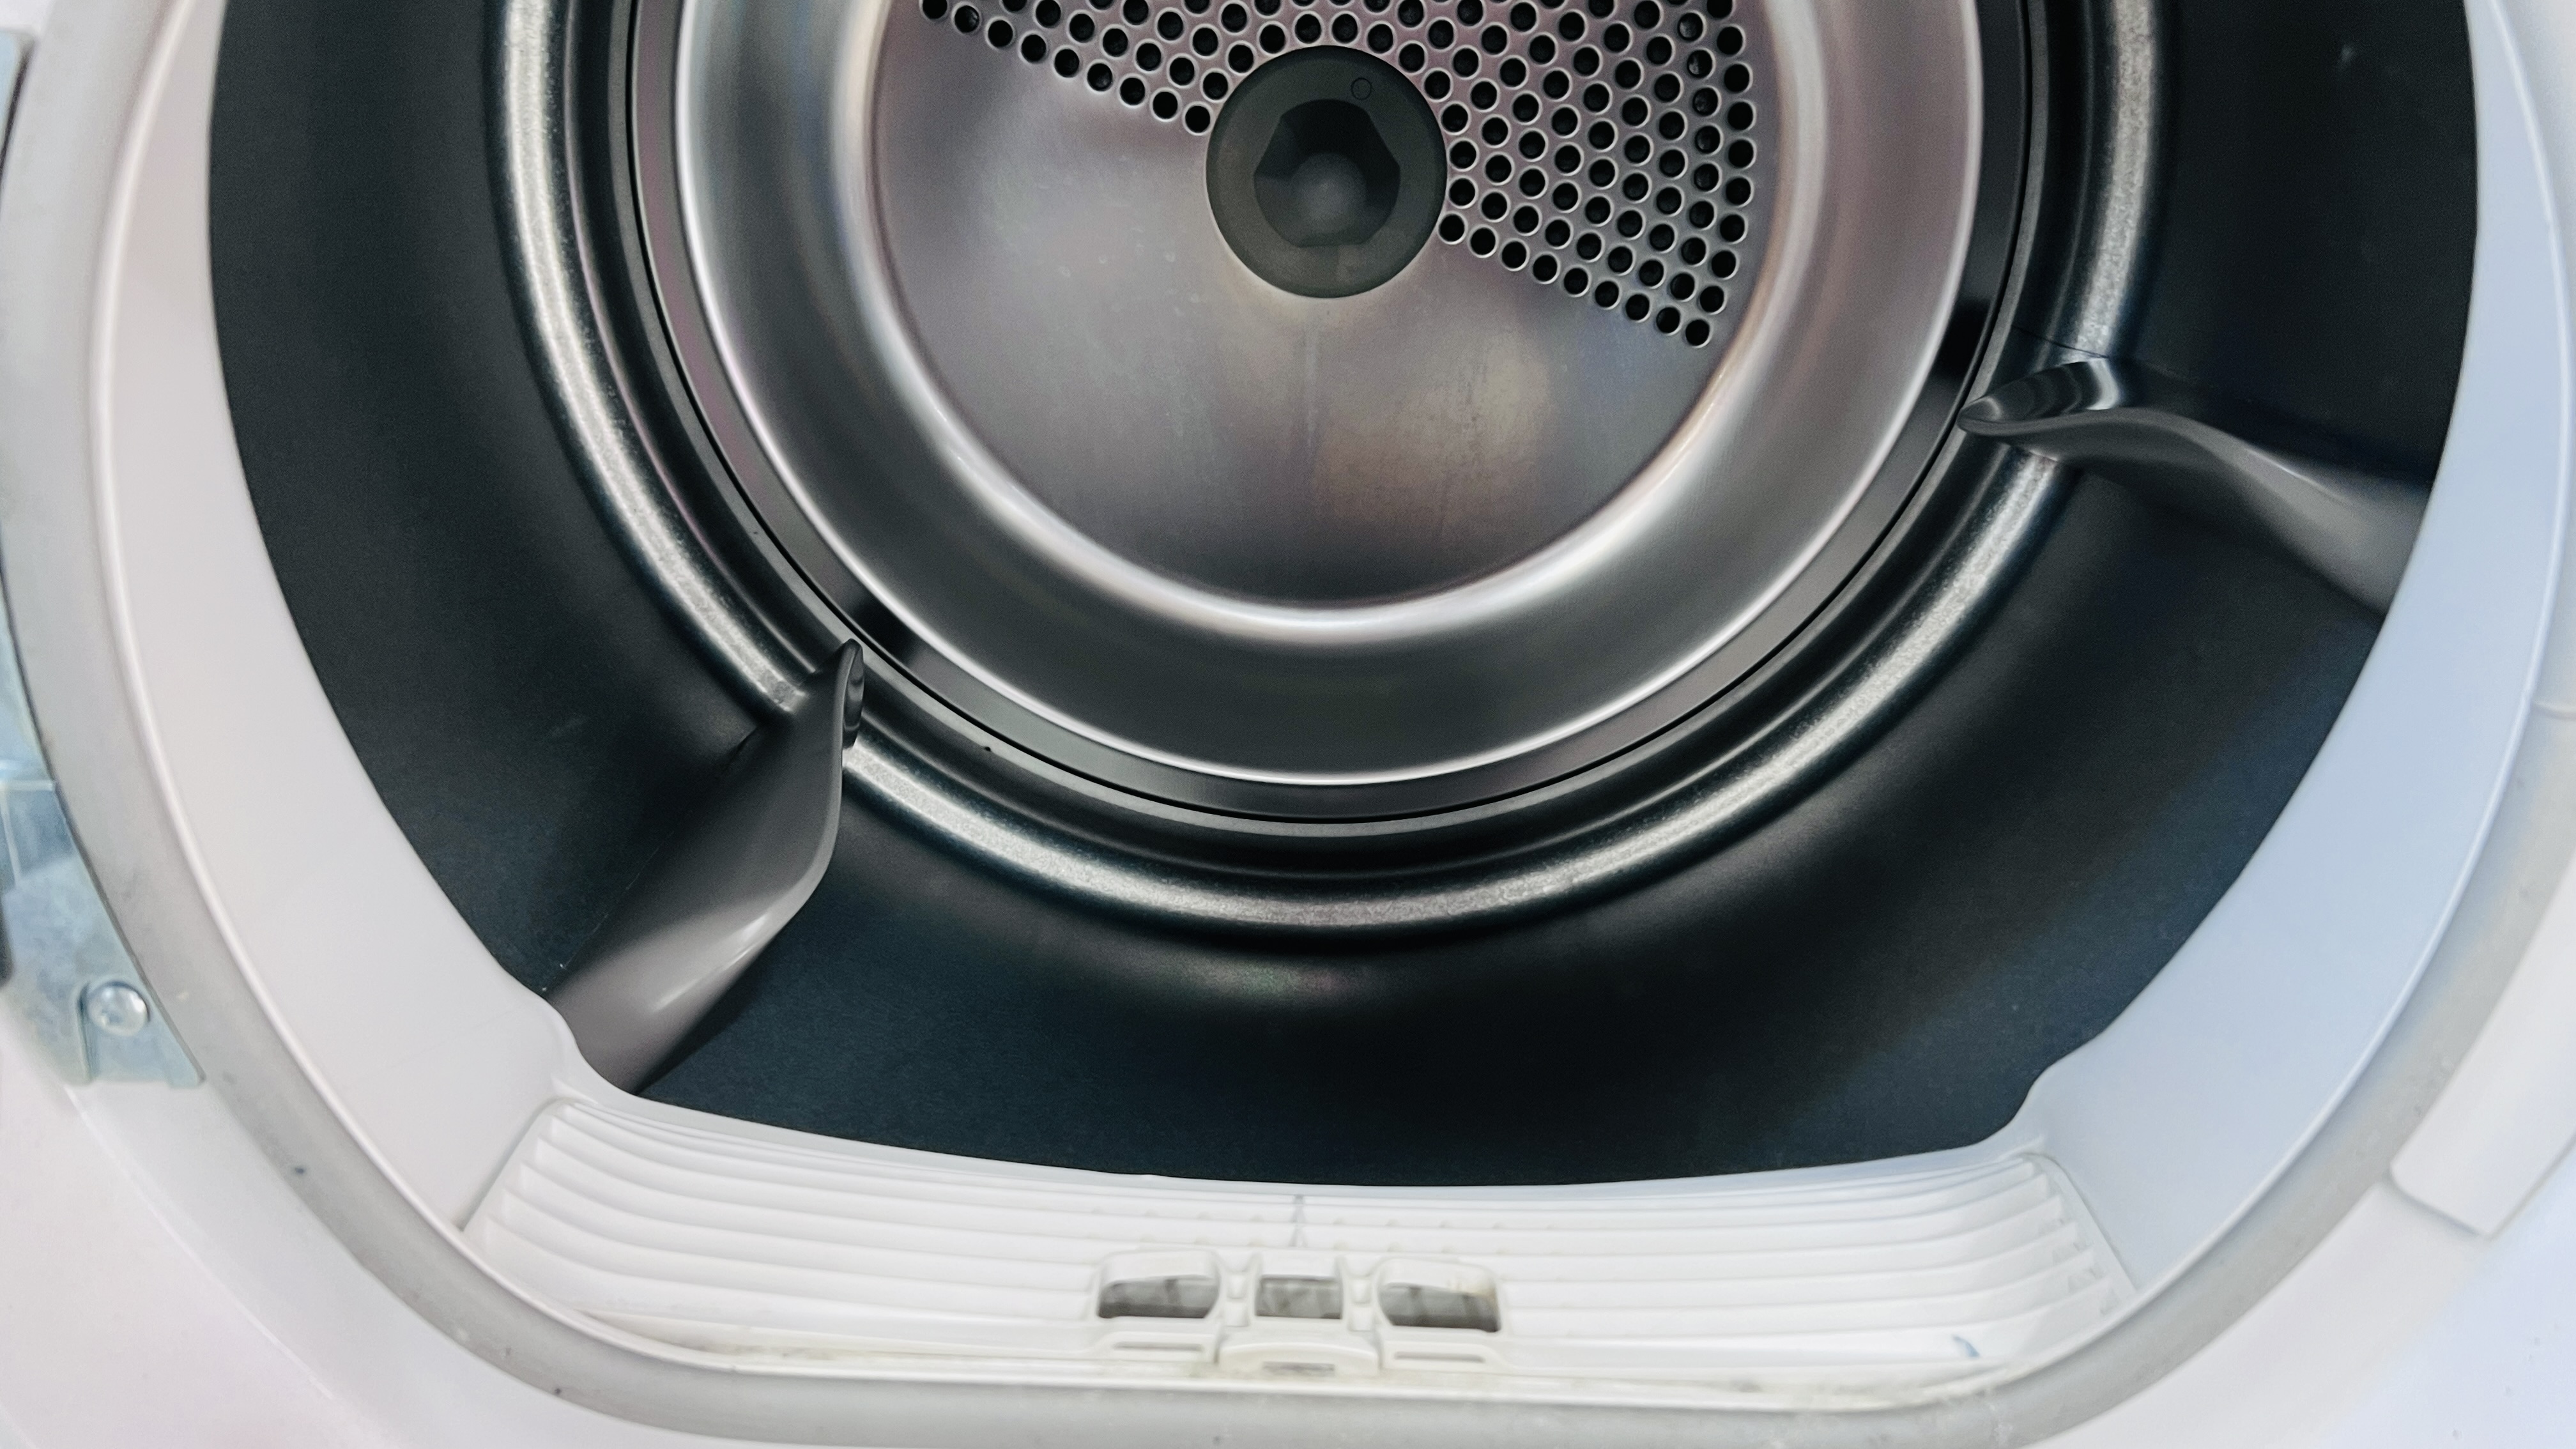 ZANUSSI LINDO 100 TUMBLE DRYER - SOLD AS SEEN. - Image 6 of 9